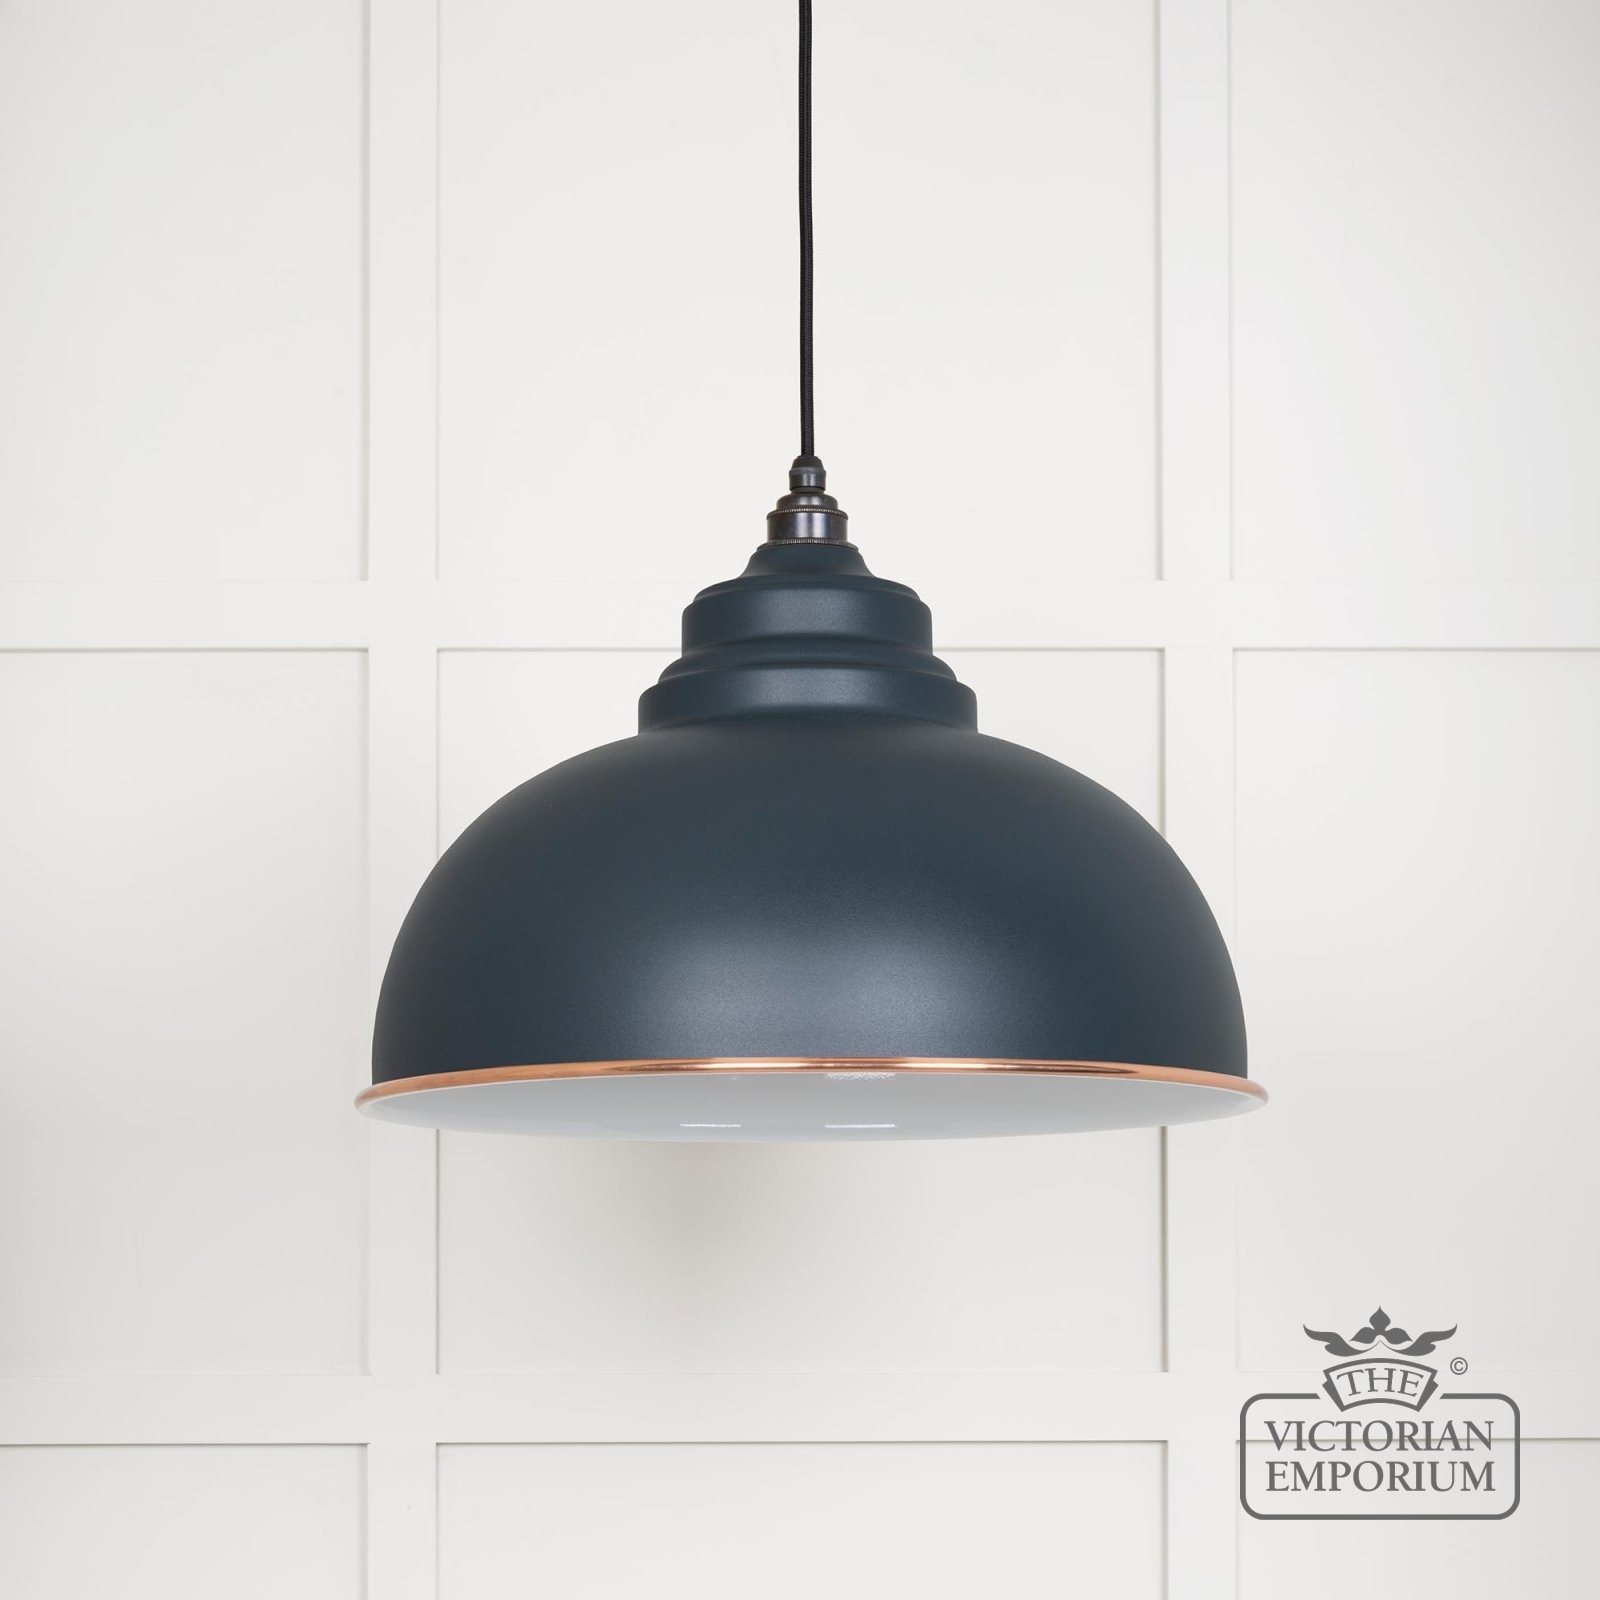 Harlow pendant light in Soot with white gloss interior